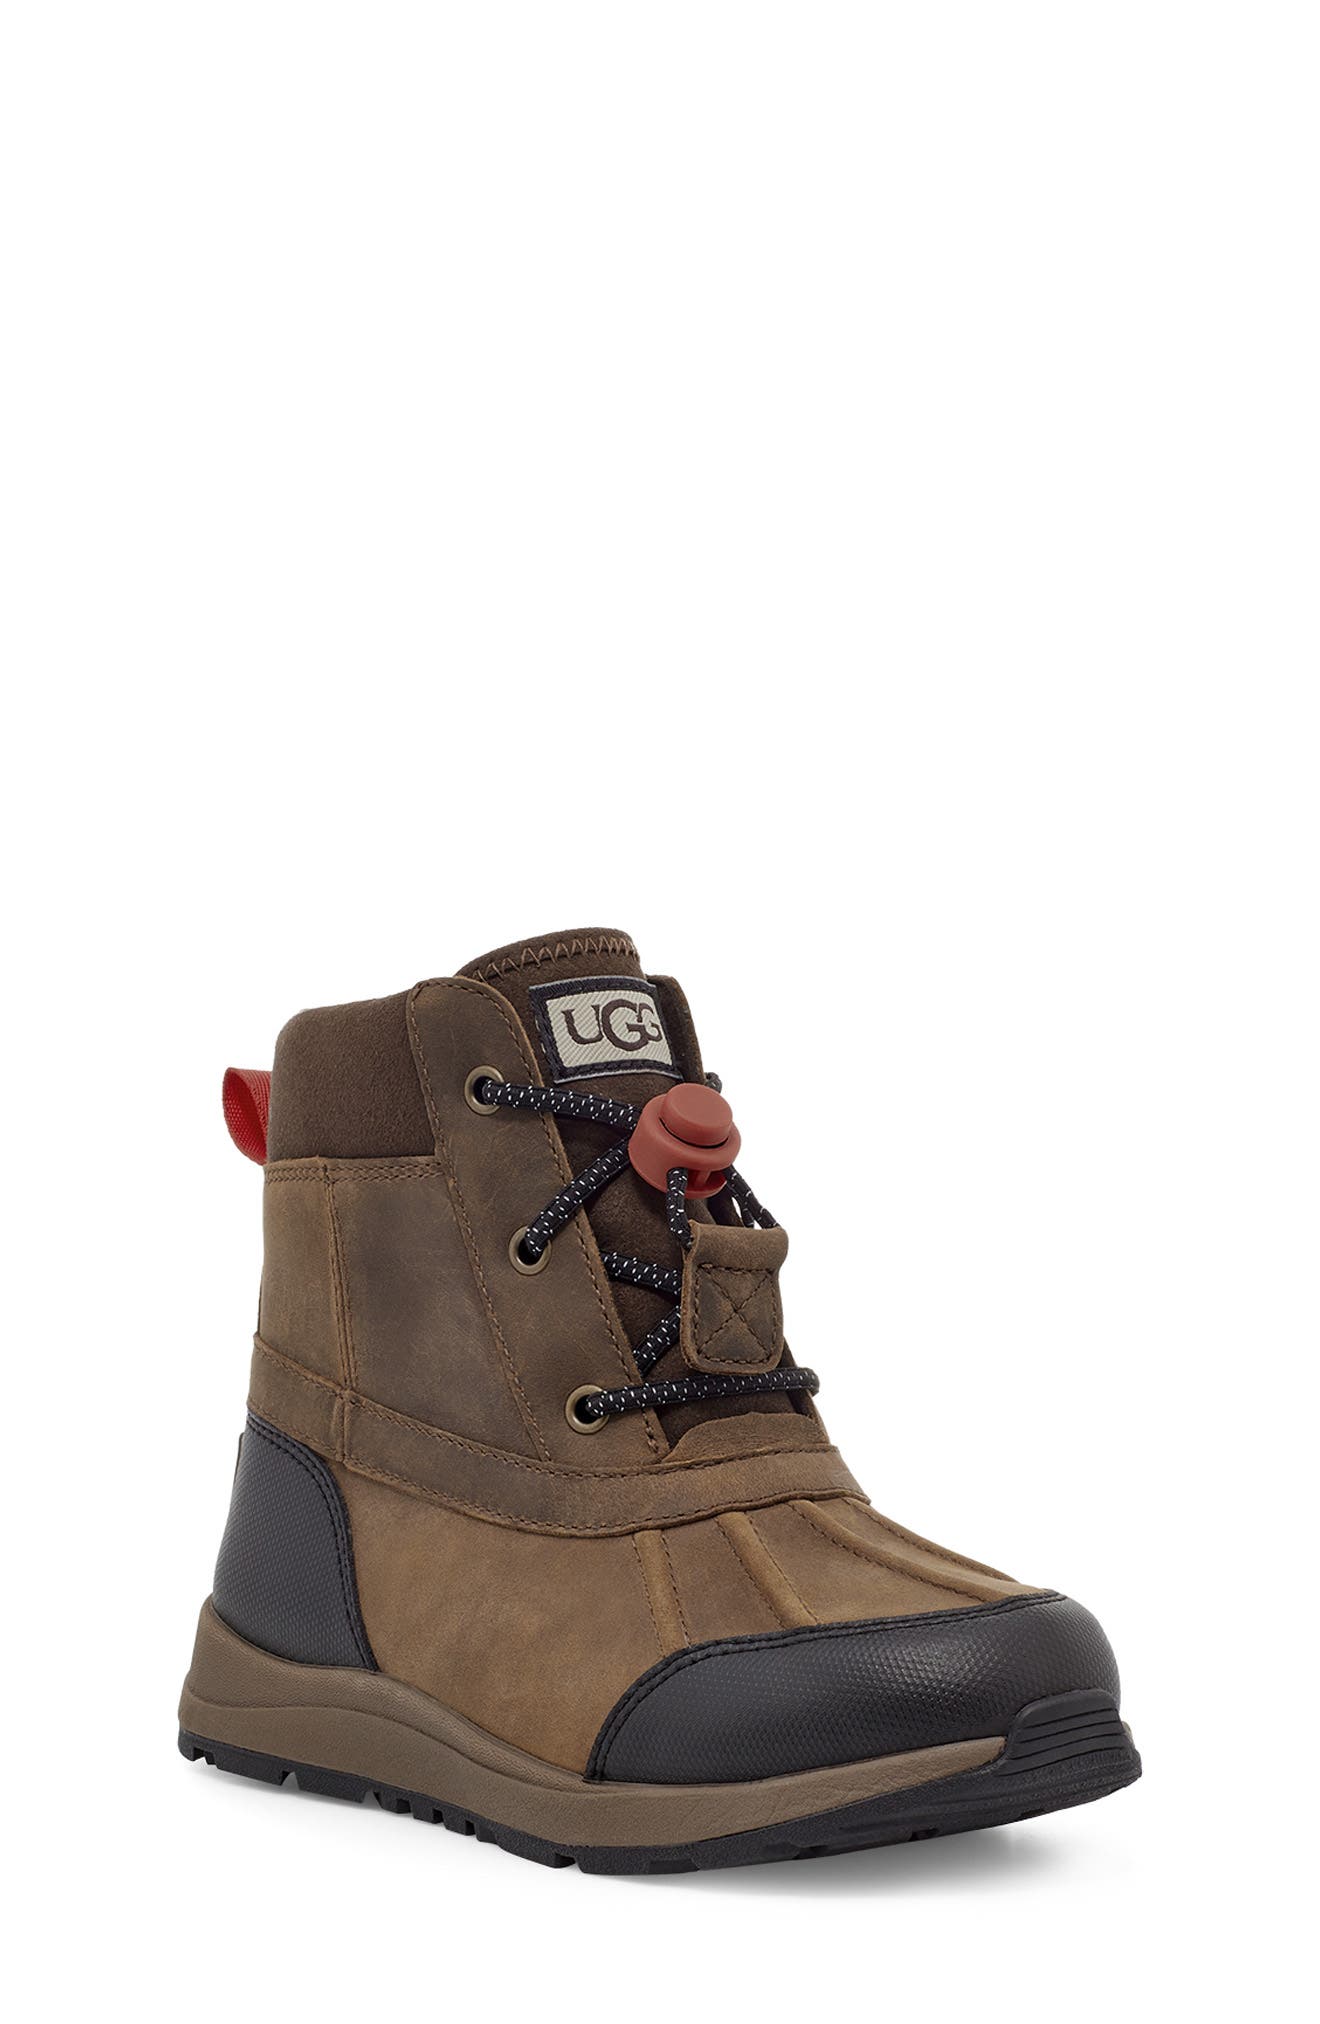 ugg shoes for boys